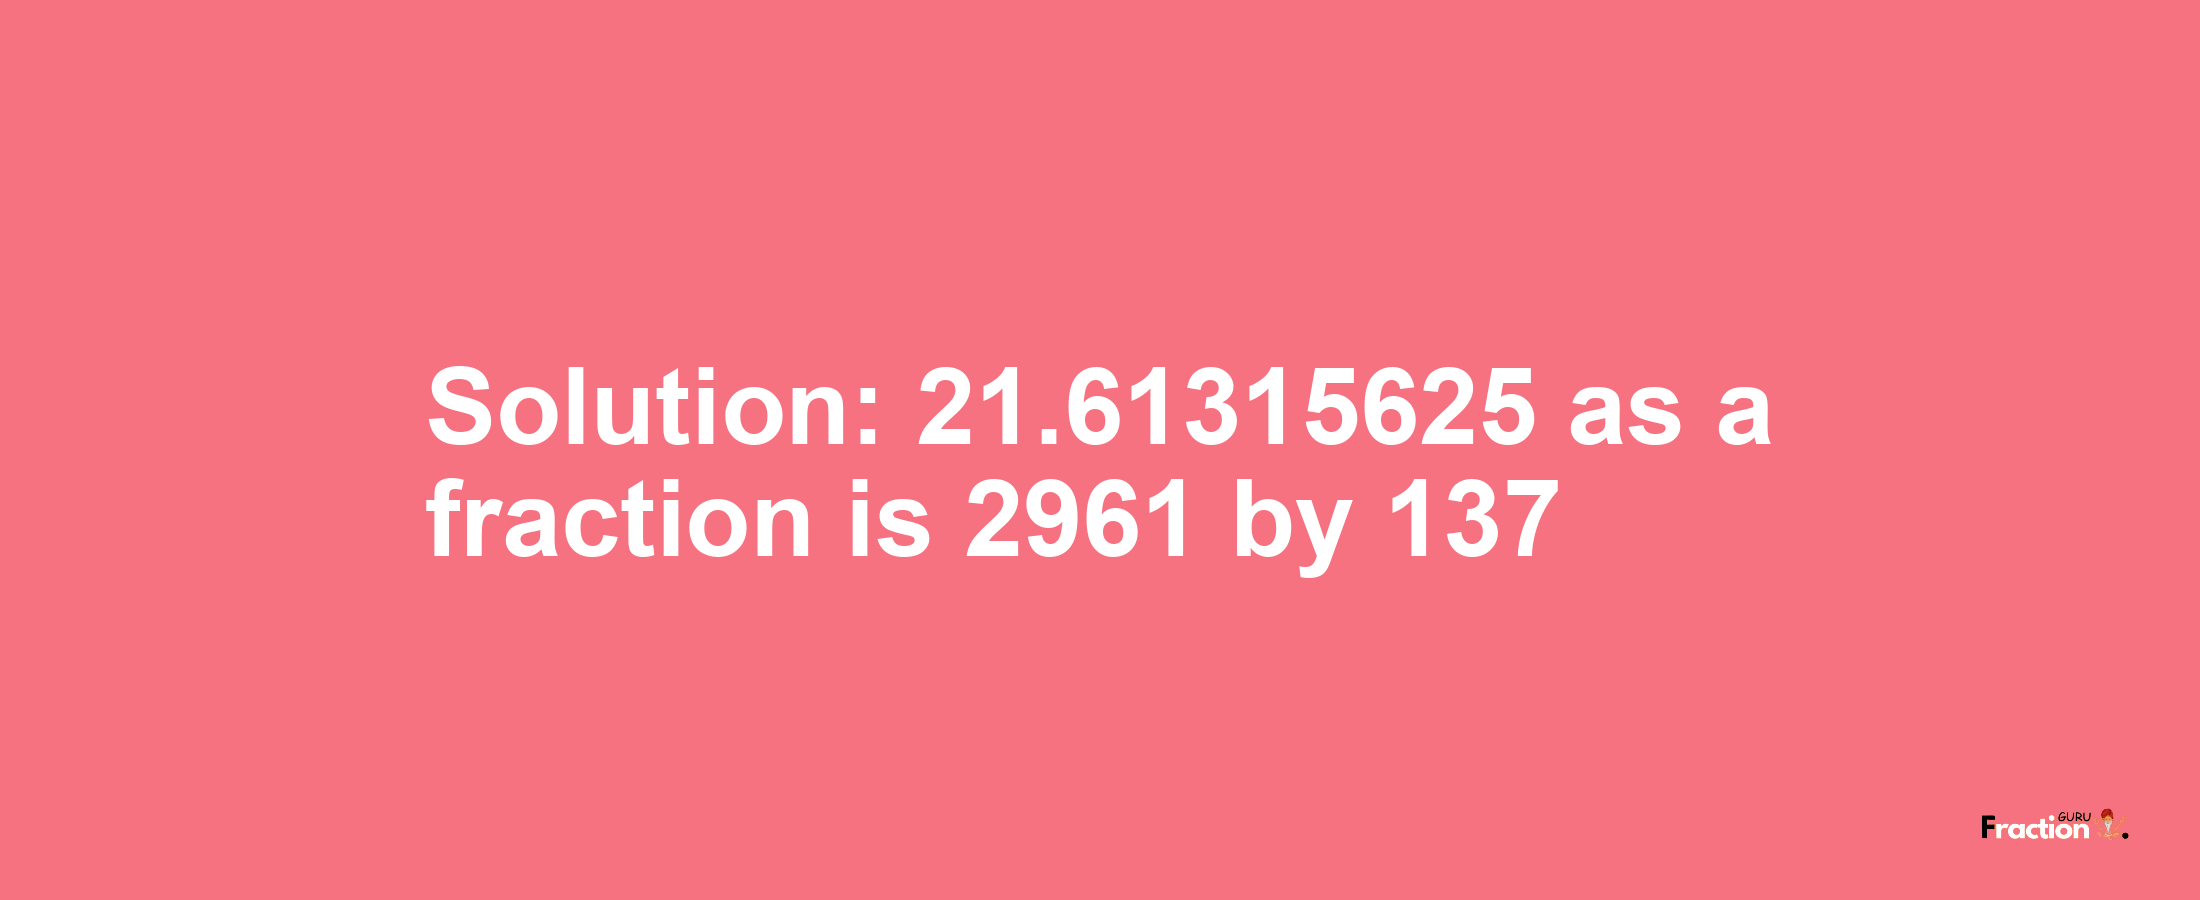 Solution:21.61315625 as a fraction is 2961/137